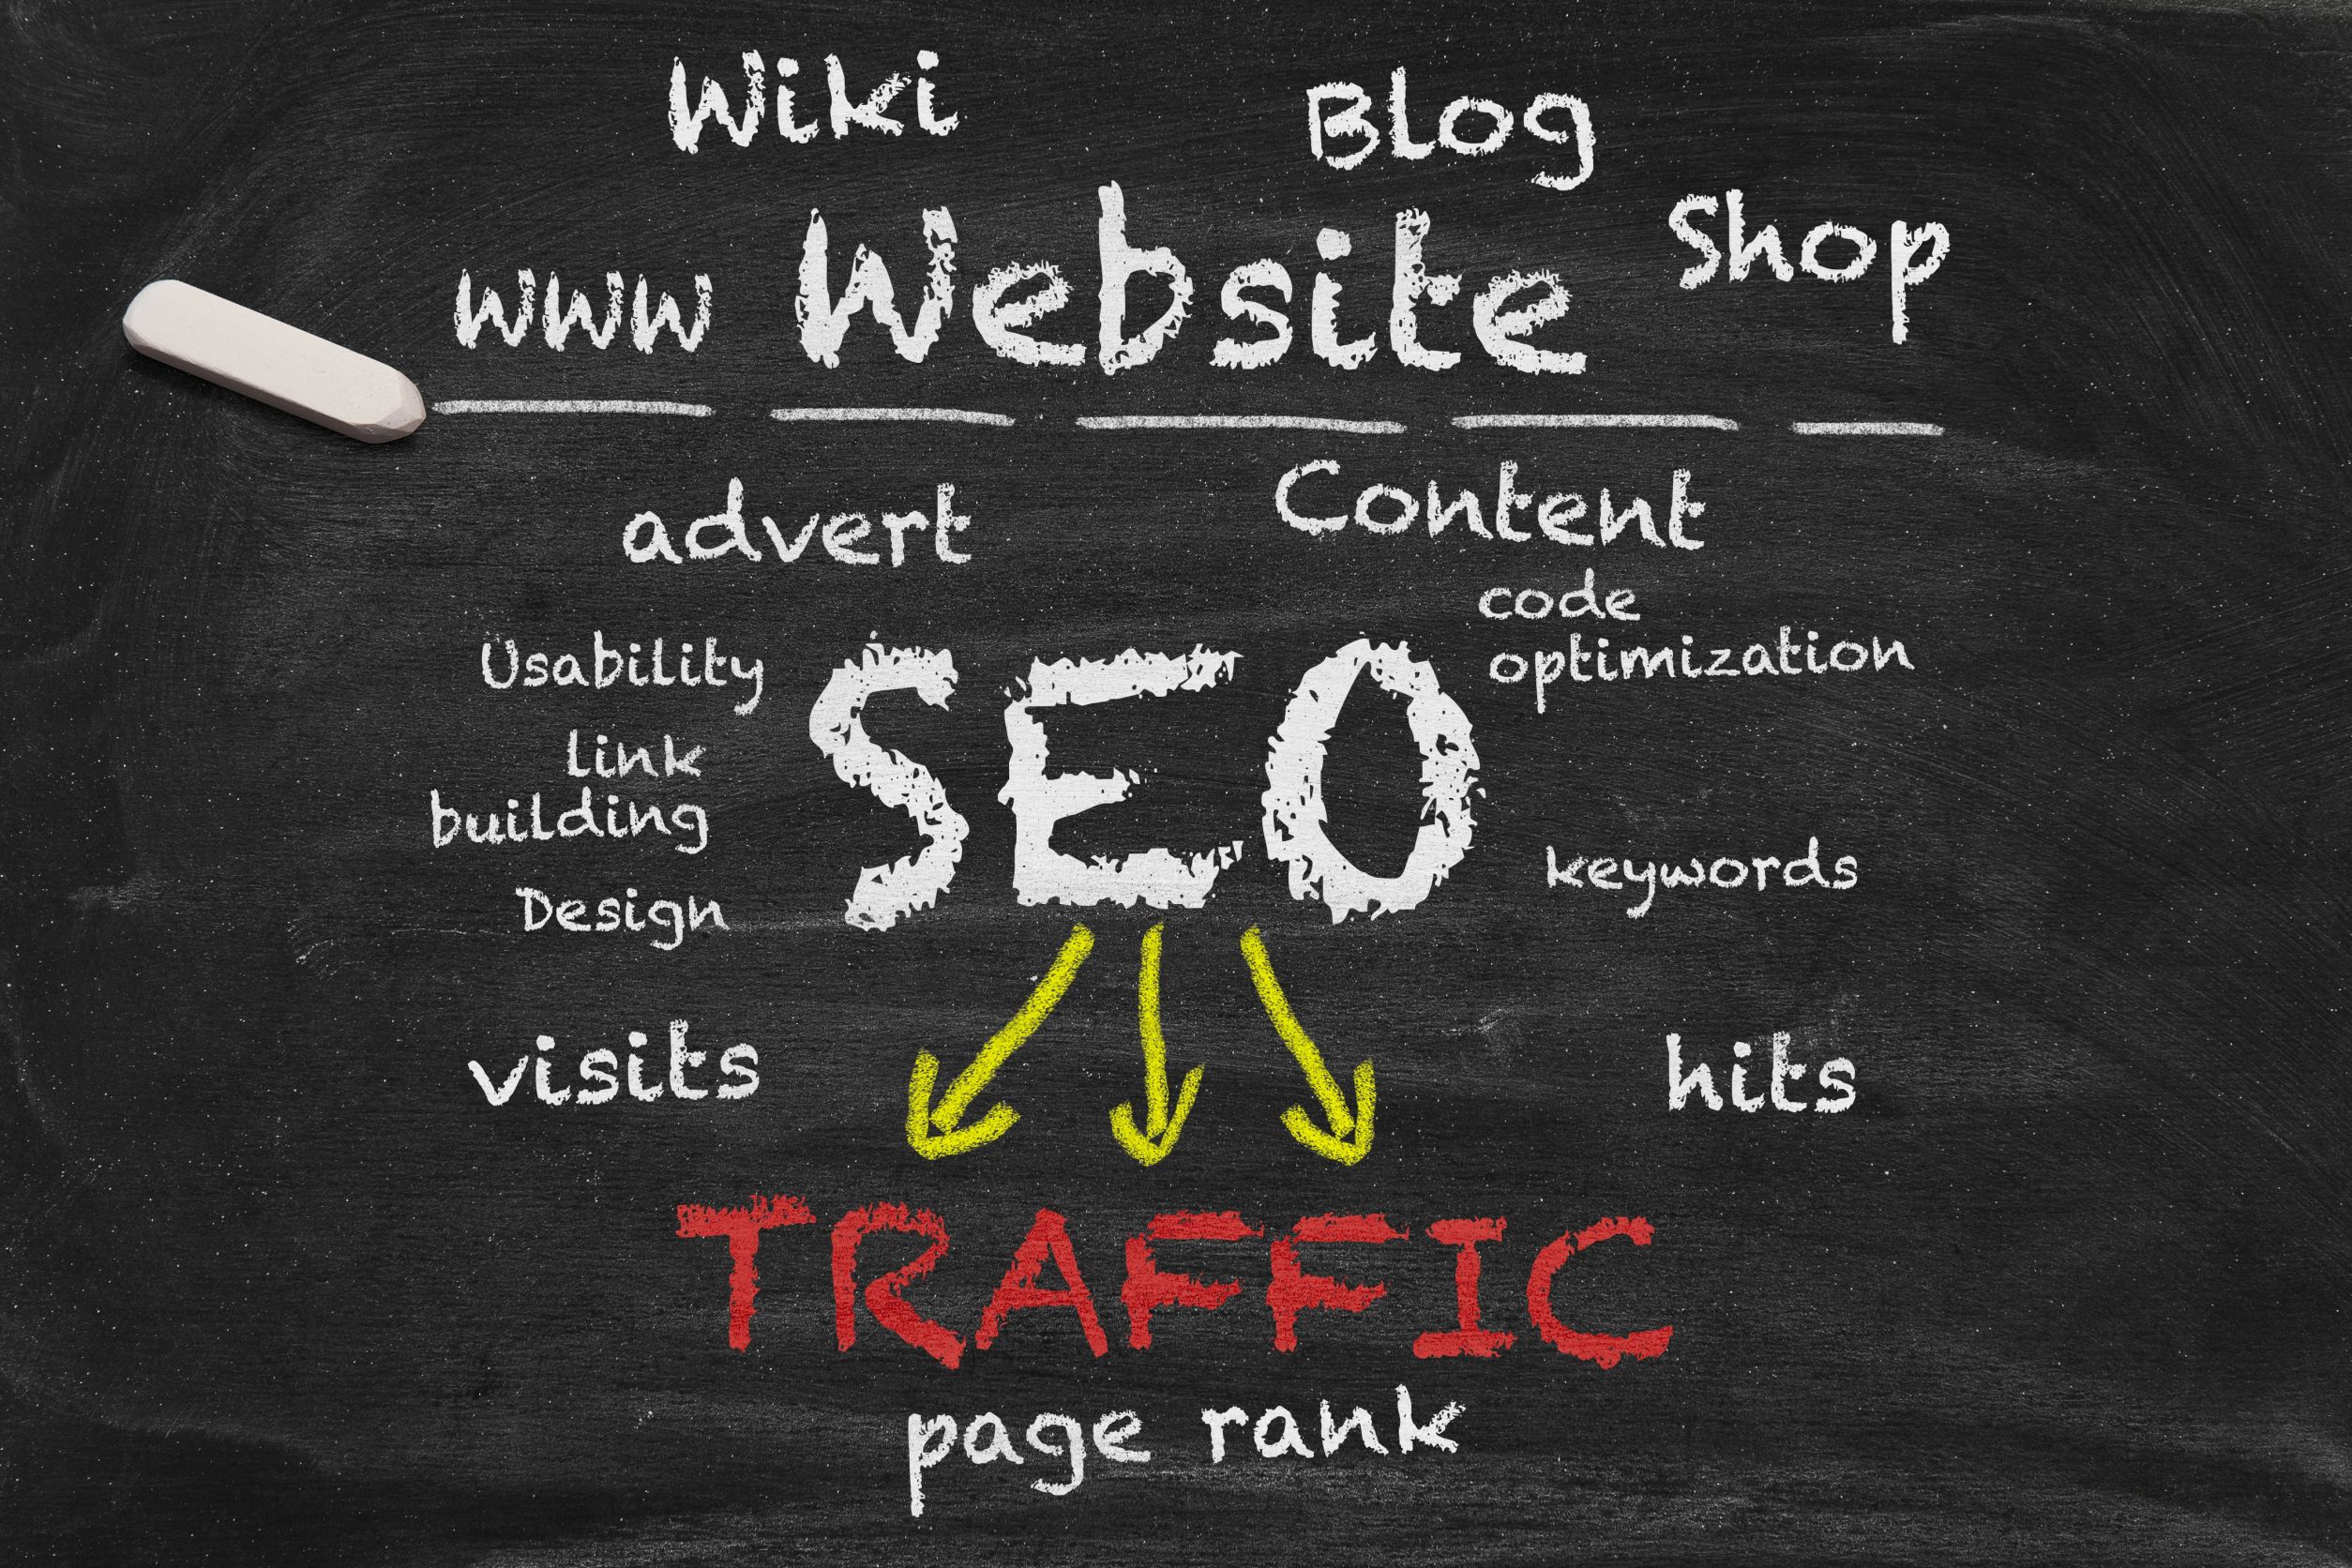 100 of Highest Quality web 2.0 Links